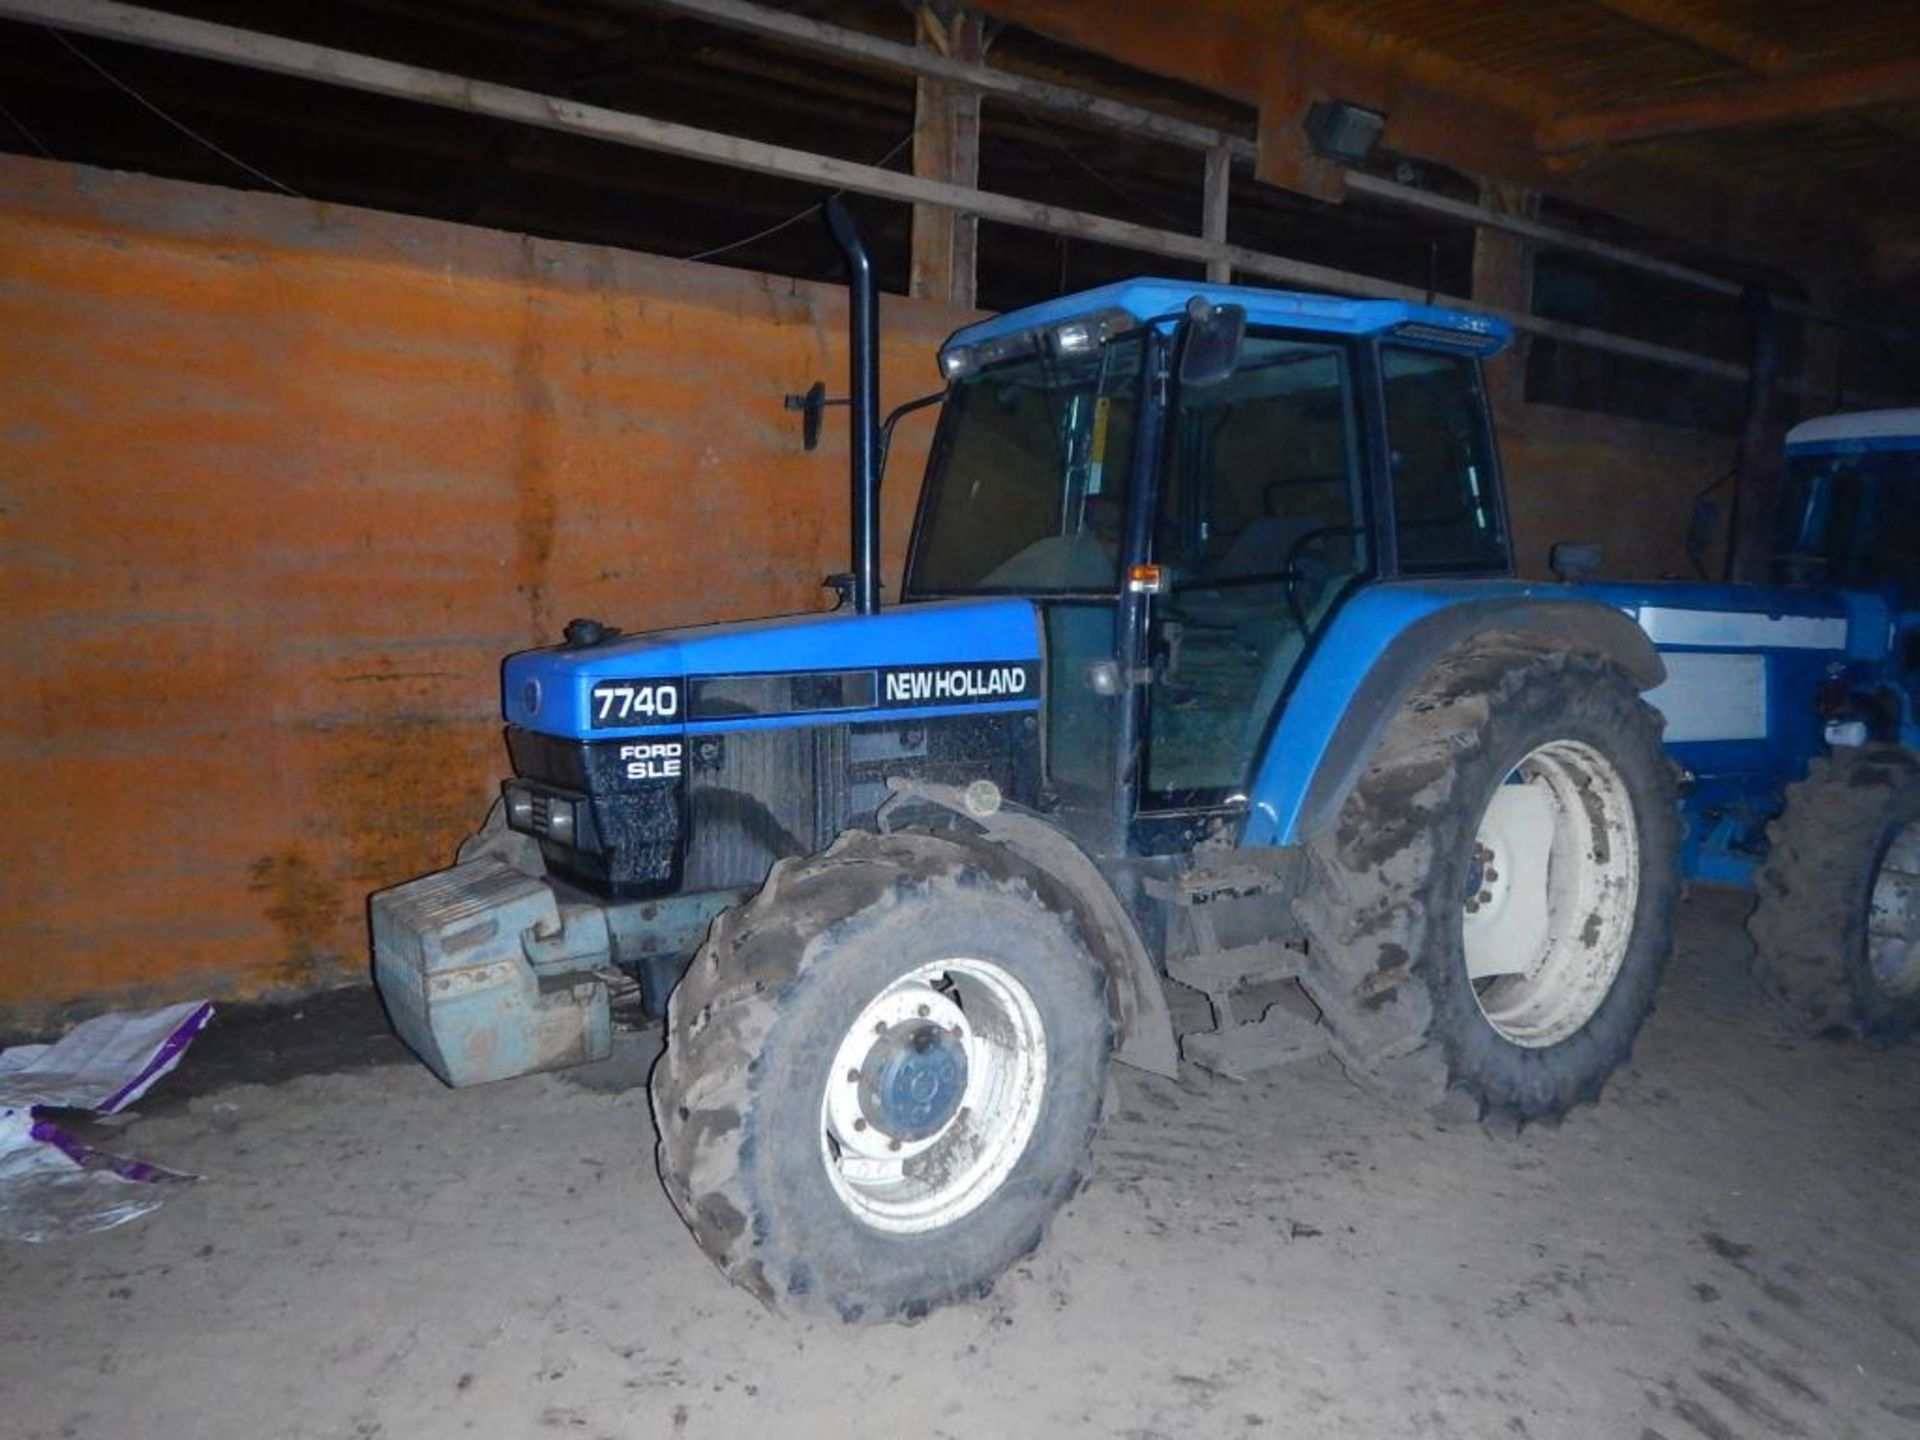 1998 NEW HOLLAND 7740 4wd TRACTOR Fitted with front weights and puh on 420/85R38 rear and 14.9R24 - Image 2 of 7